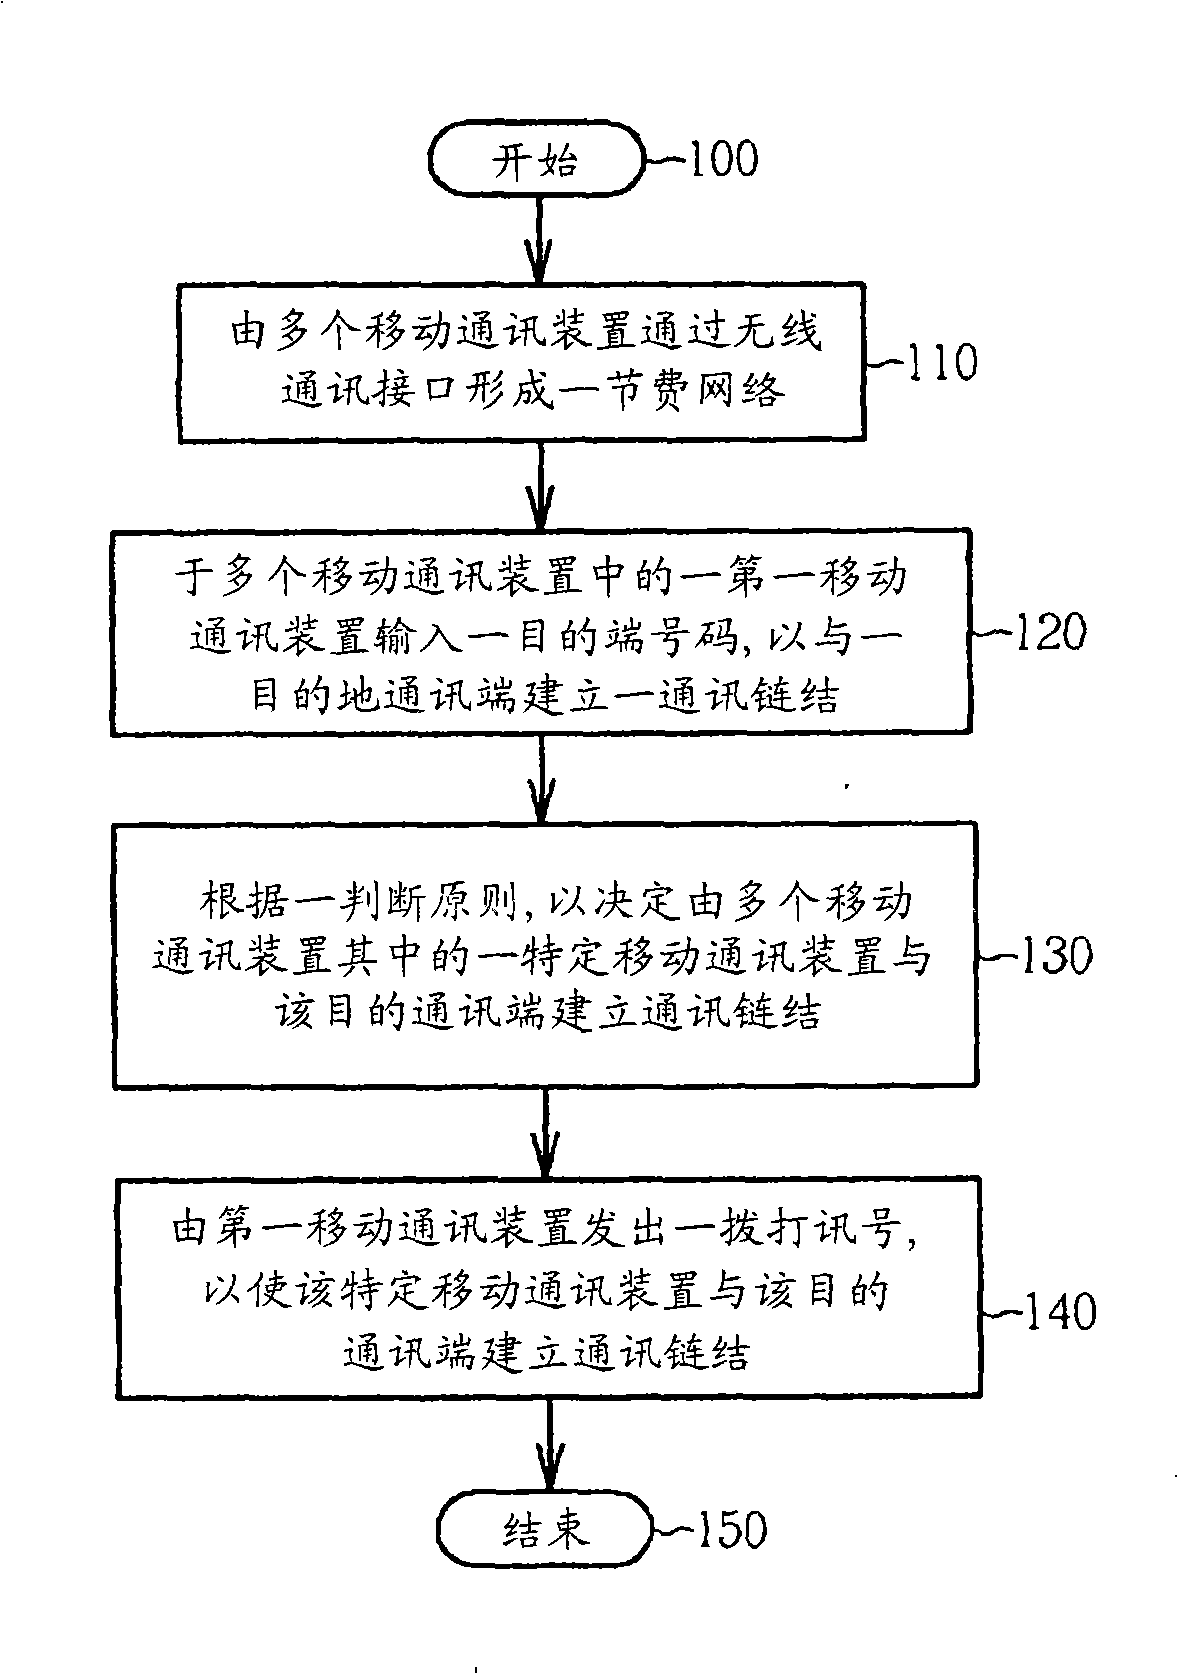 Method for saving call charge through wireless communication interface of mobile communication apparatus